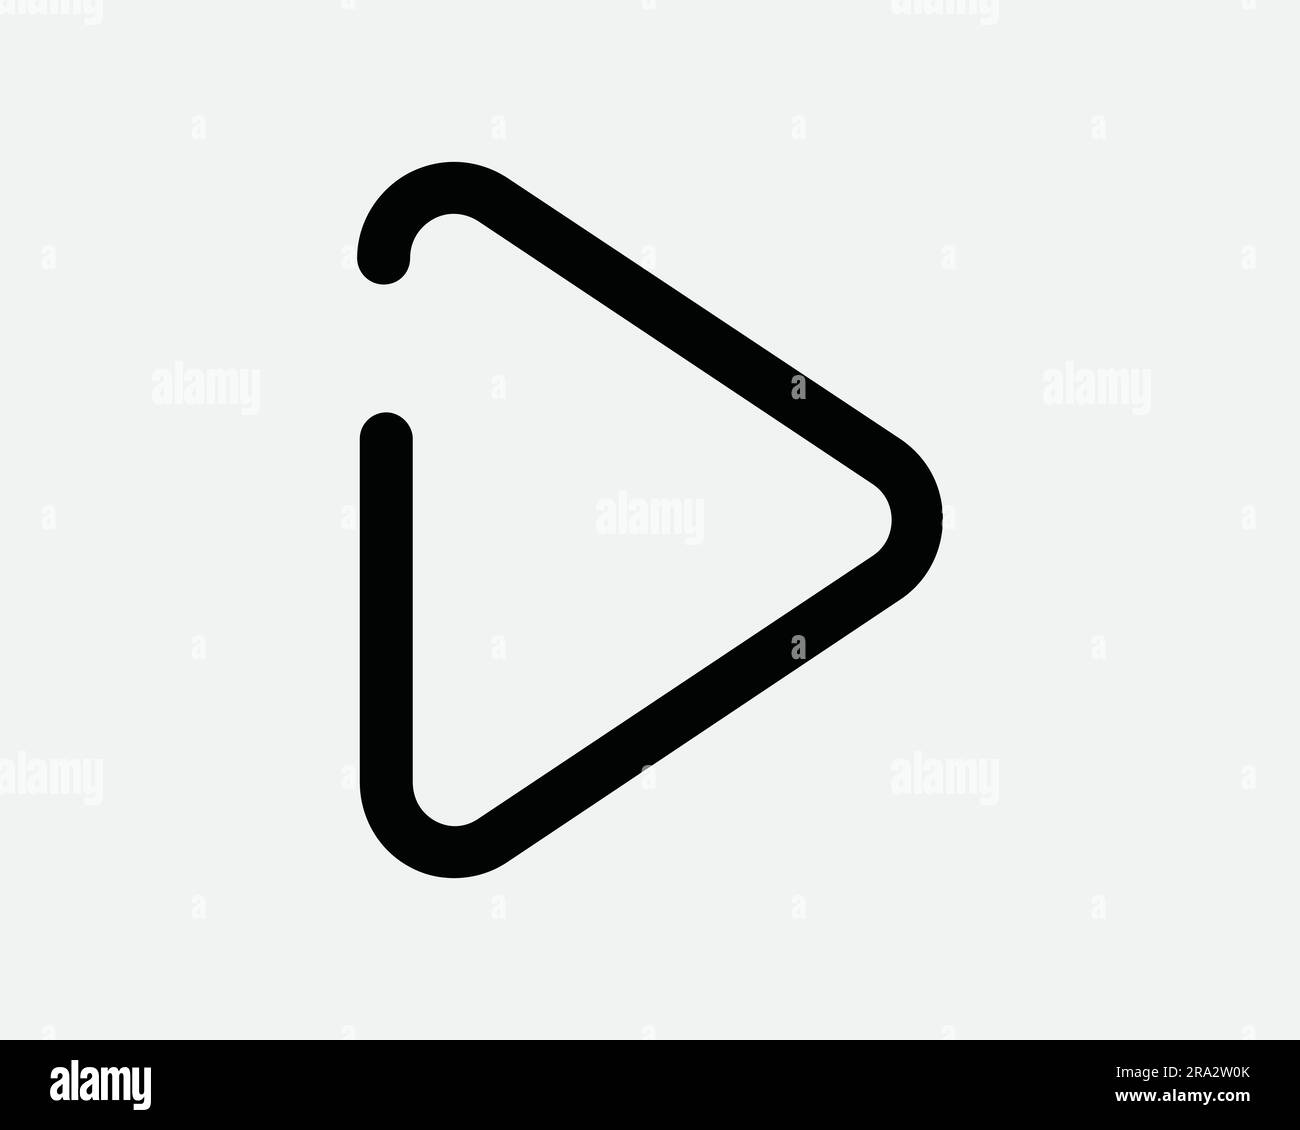 Play Button Line Icon Media Music Playback Audio Movie Player Start Next Right Arrow Shape Black White Graphic Clipart Artwork Symbol Sign Vector EPS Stock Vector